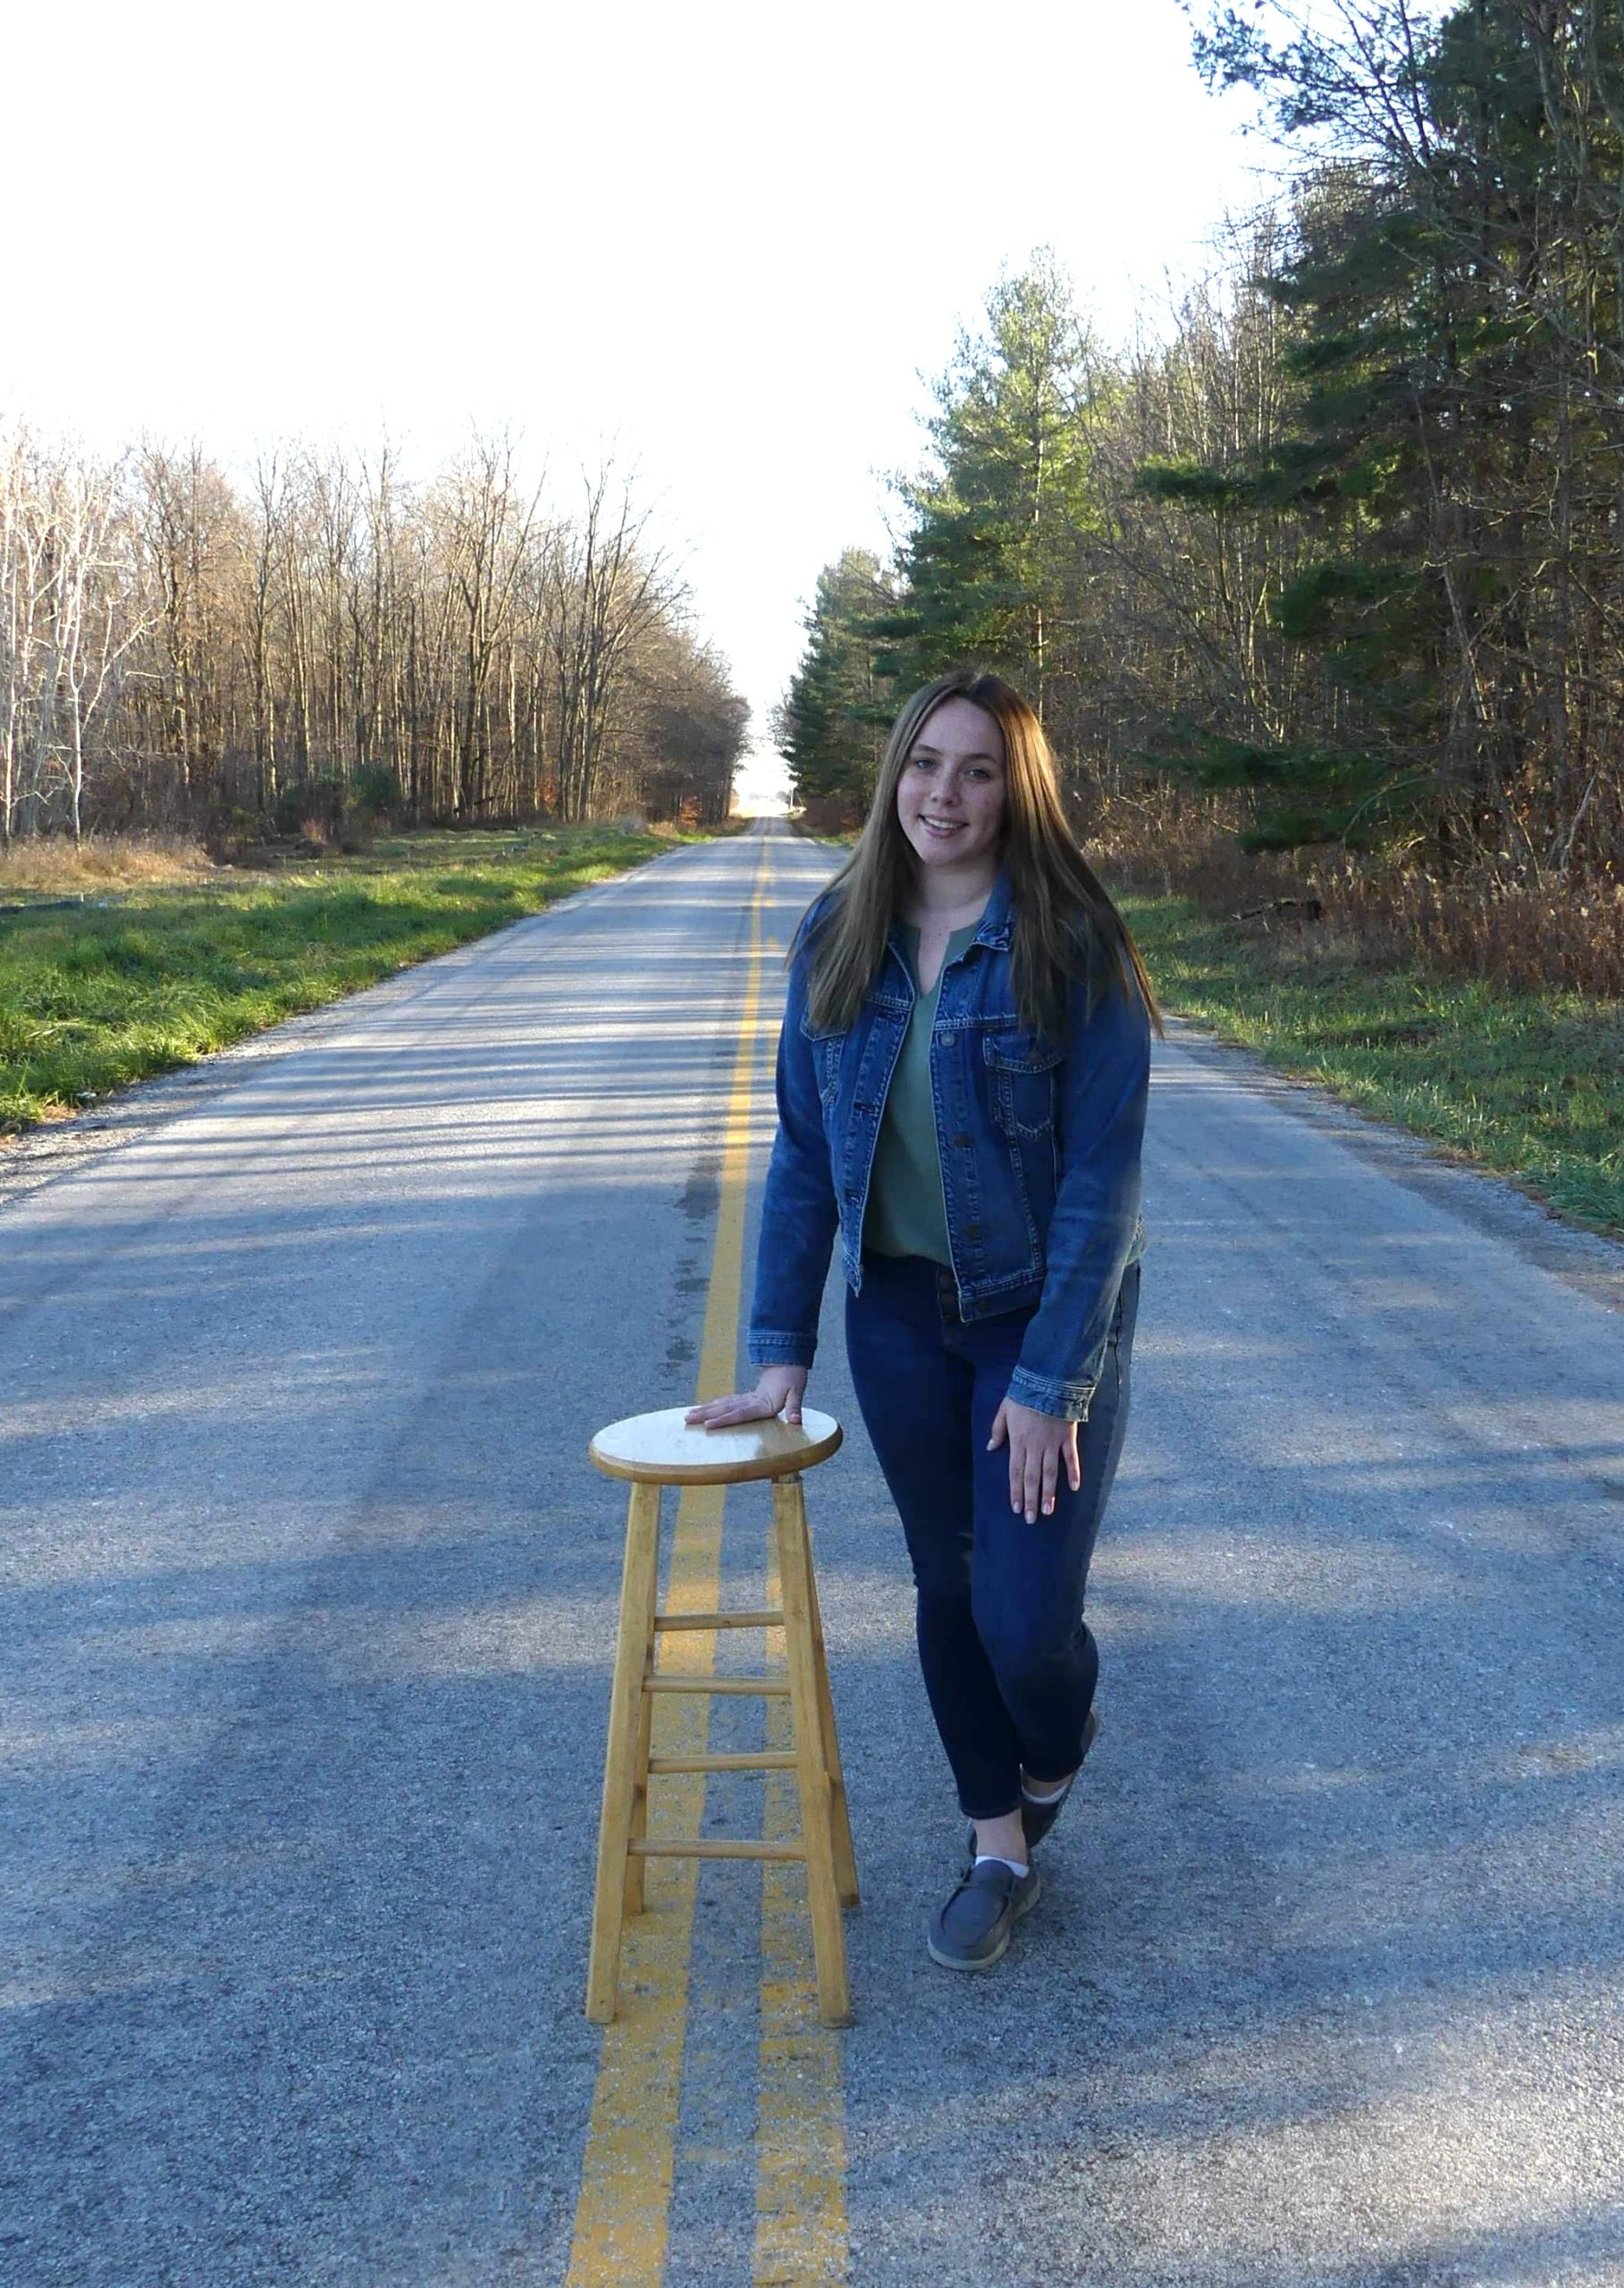 A woman standing next to a wooden stool on a road, under an open sky.